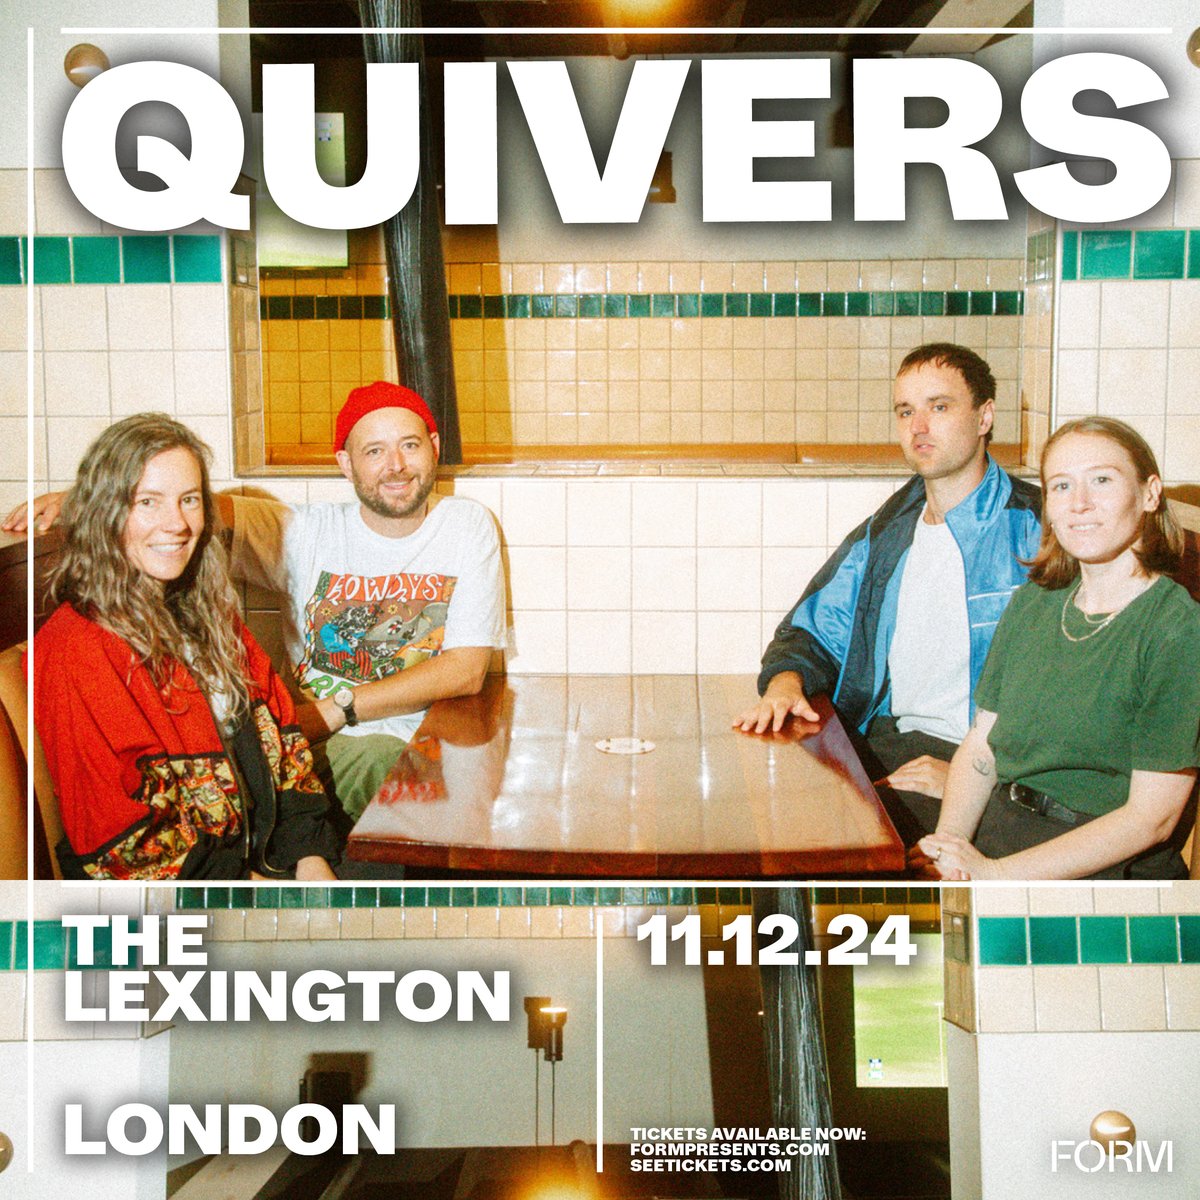 Melbourne indie quartet @Quiversam are bringing their cathartic jangly guitar pop to @thelexington, London on 11th December! 🎟Tickets are on sale now: formpresents.seetickets.com/event/quivers/…